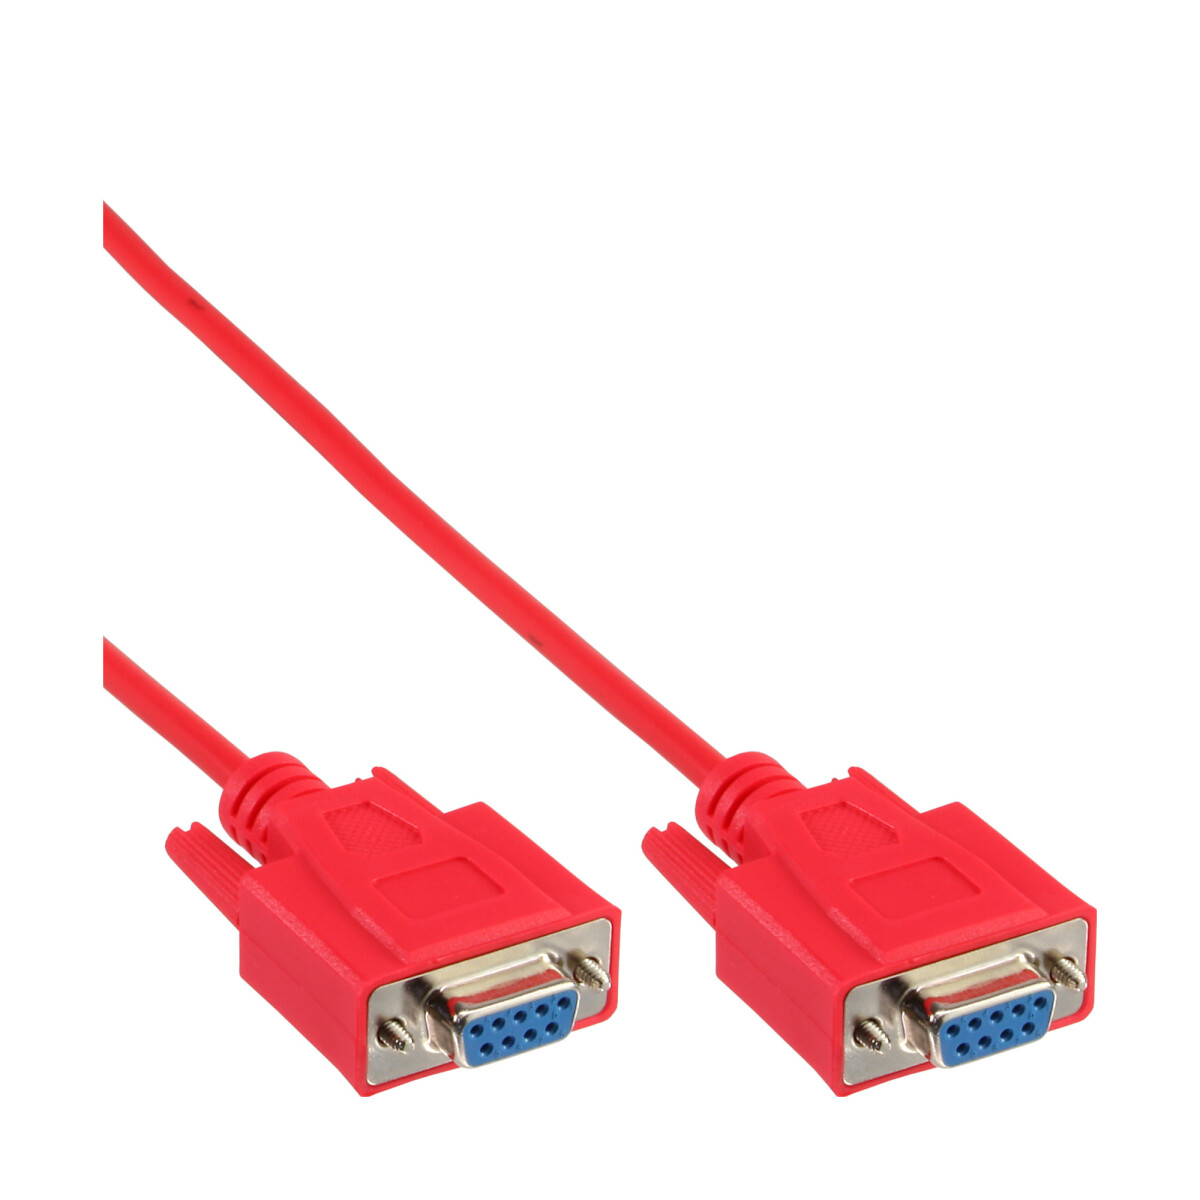 InLine® null modem cable DP9 Pin female / female,...